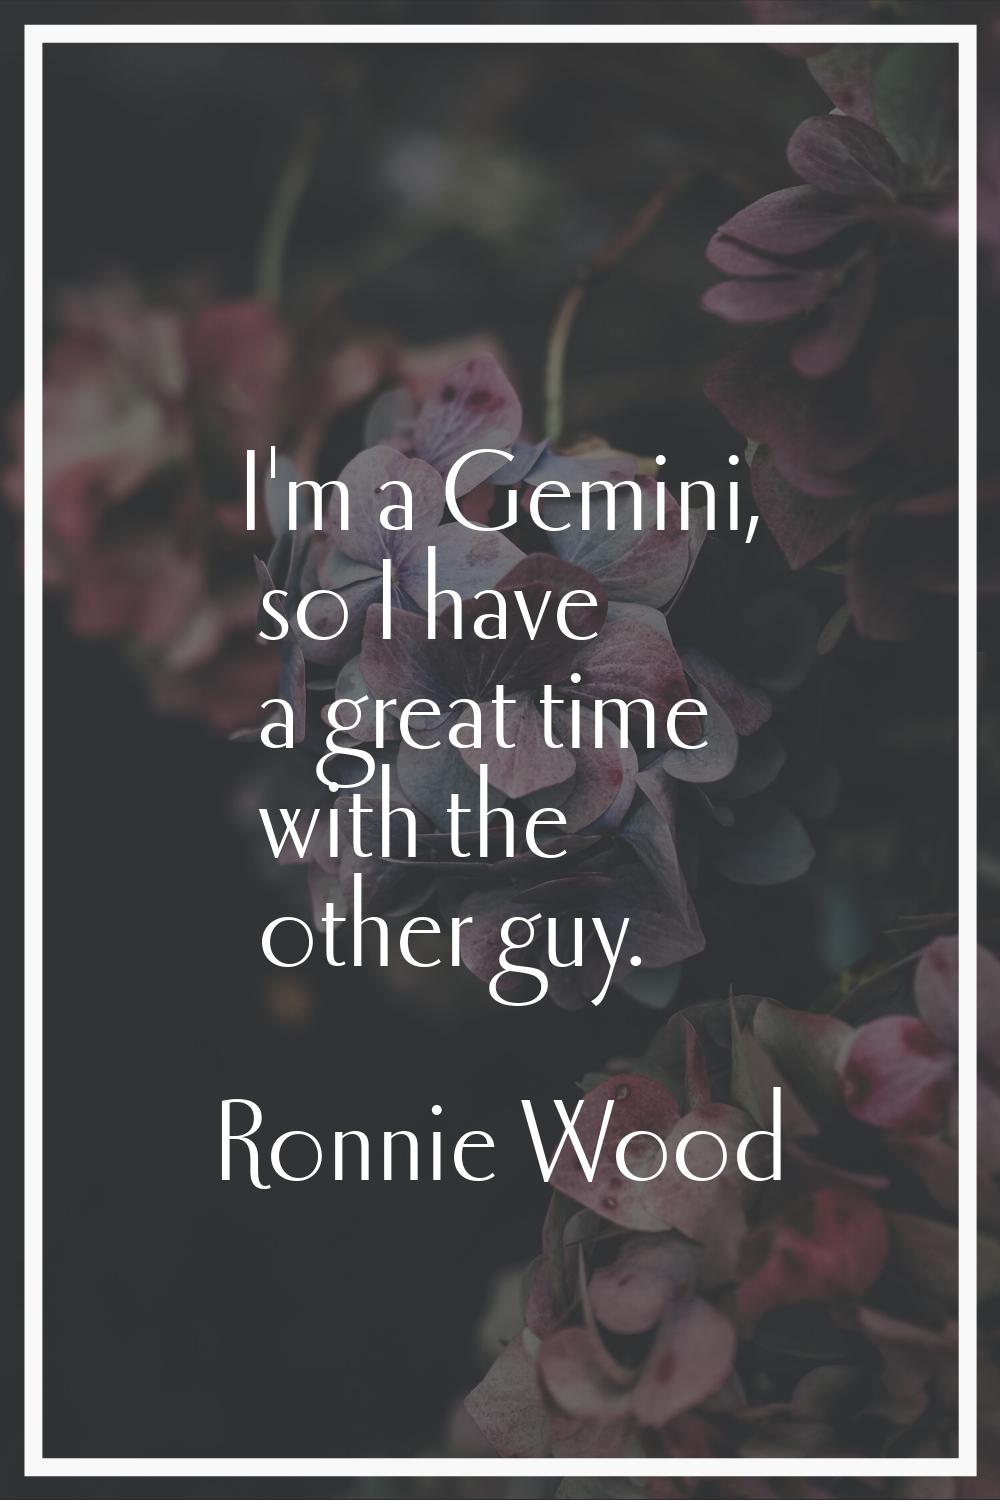 I'm a Gemini, so I have a great time with the other guy.